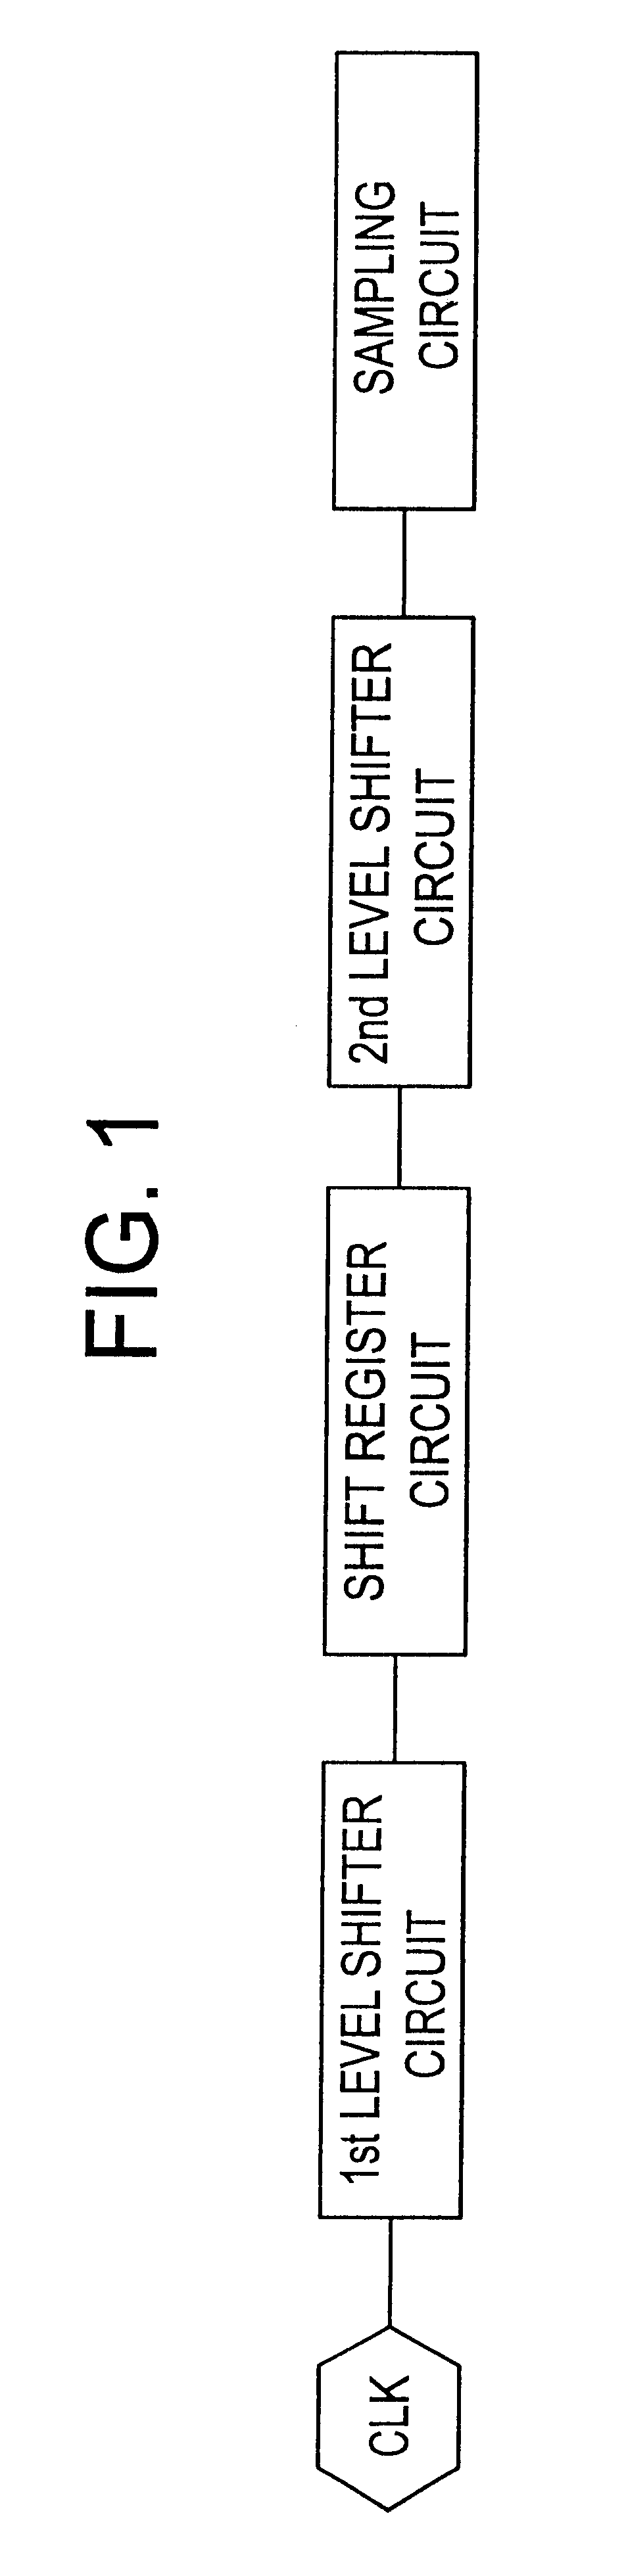 Semiconductor display device and driving circuit therefor